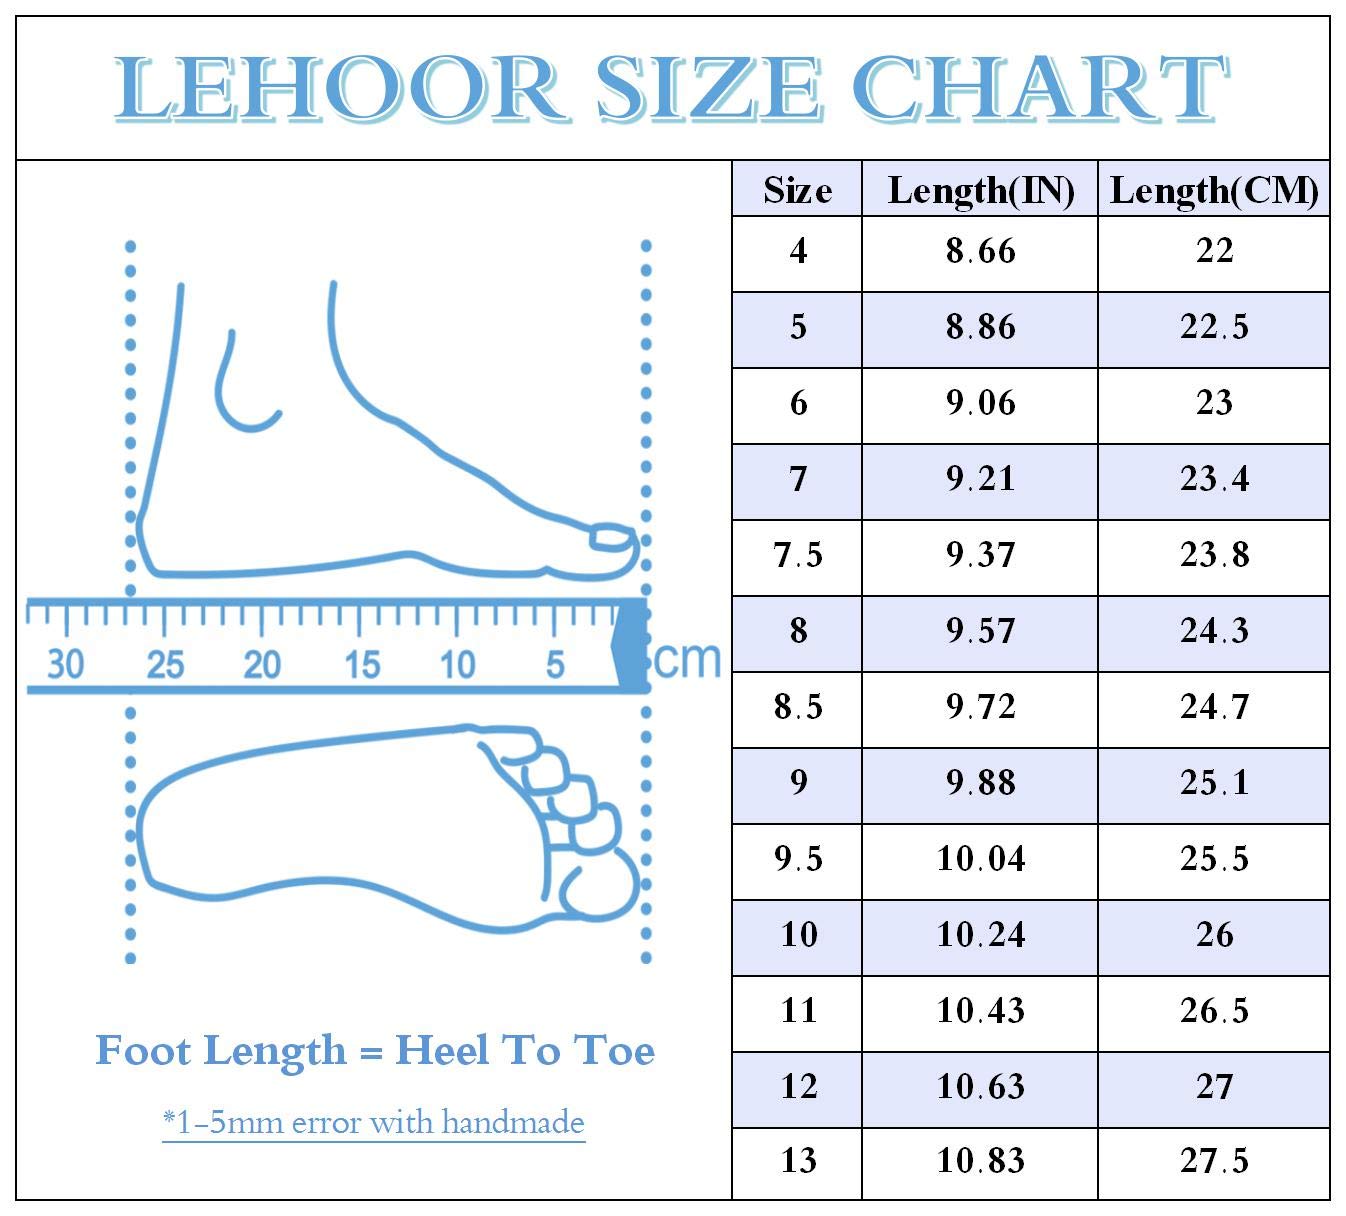 LEHOOR Women Lace-up Brogue Perforated Multicolor Leather Flat Oxfords Vintage Pointed Toe Casual Comfortable Wingtip Derby Size 4-11 M US